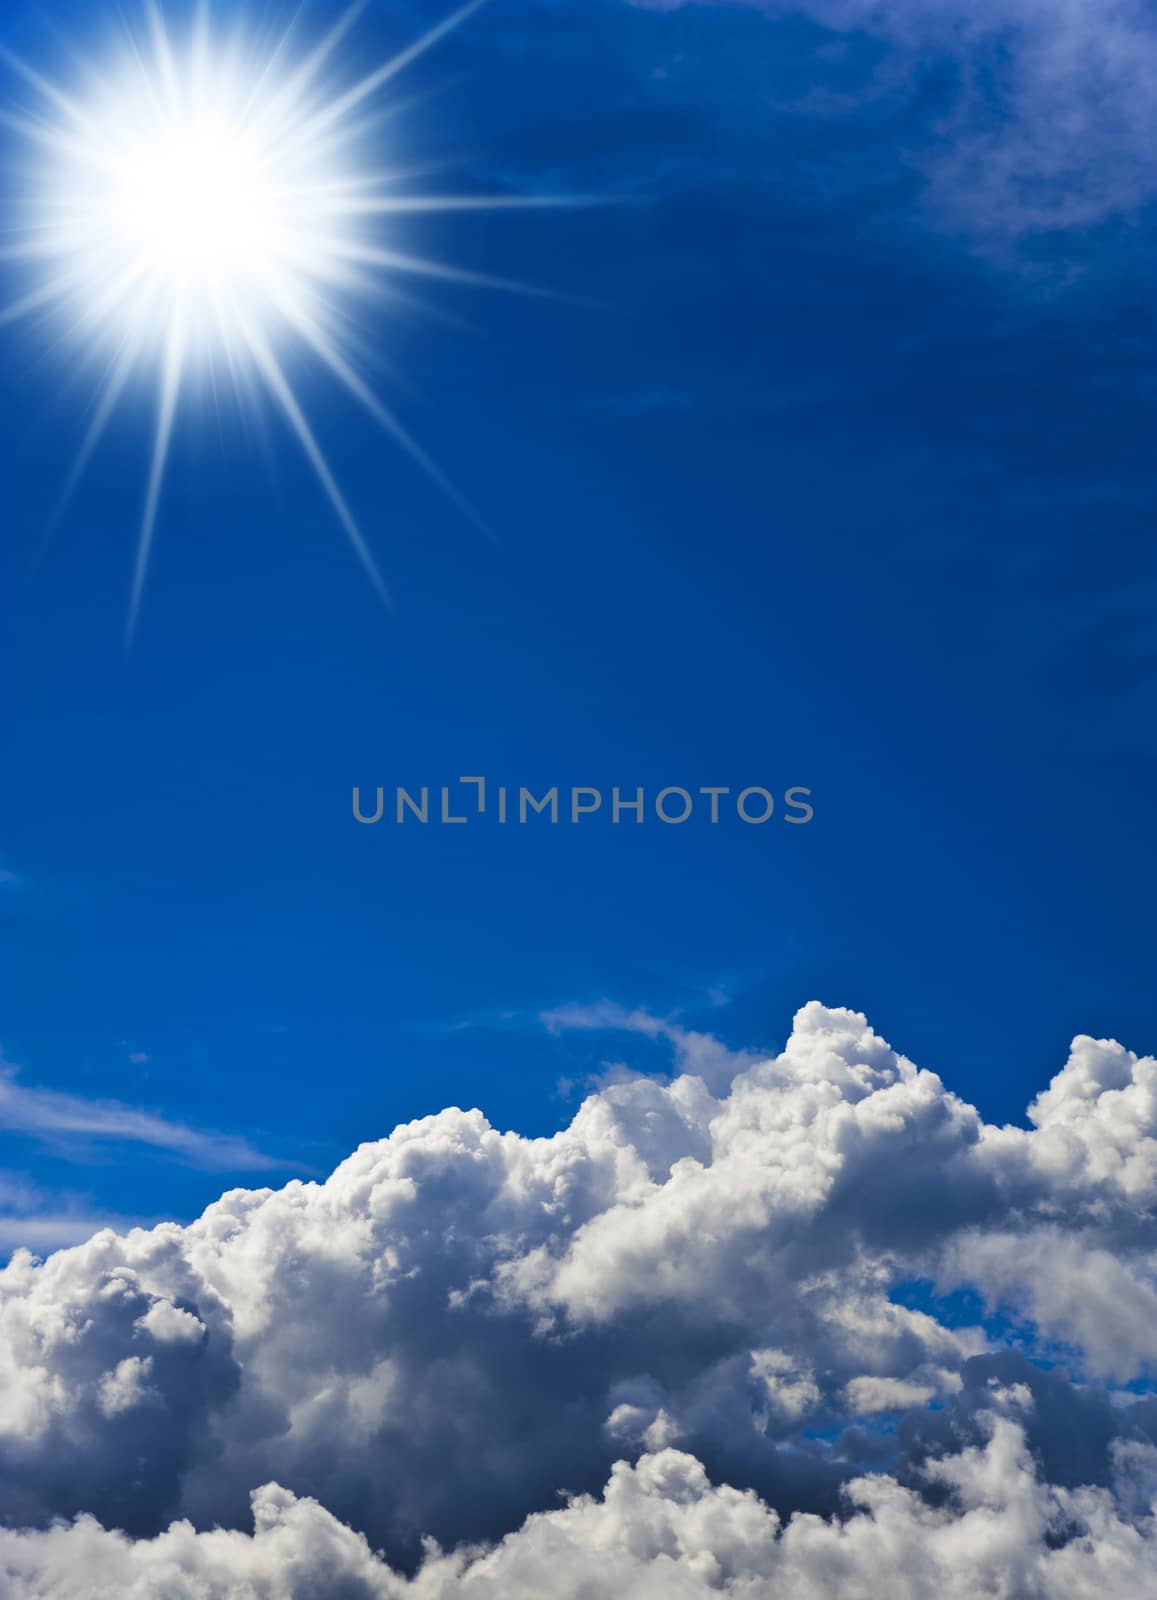 Vertical image of a blue sky with white clouds